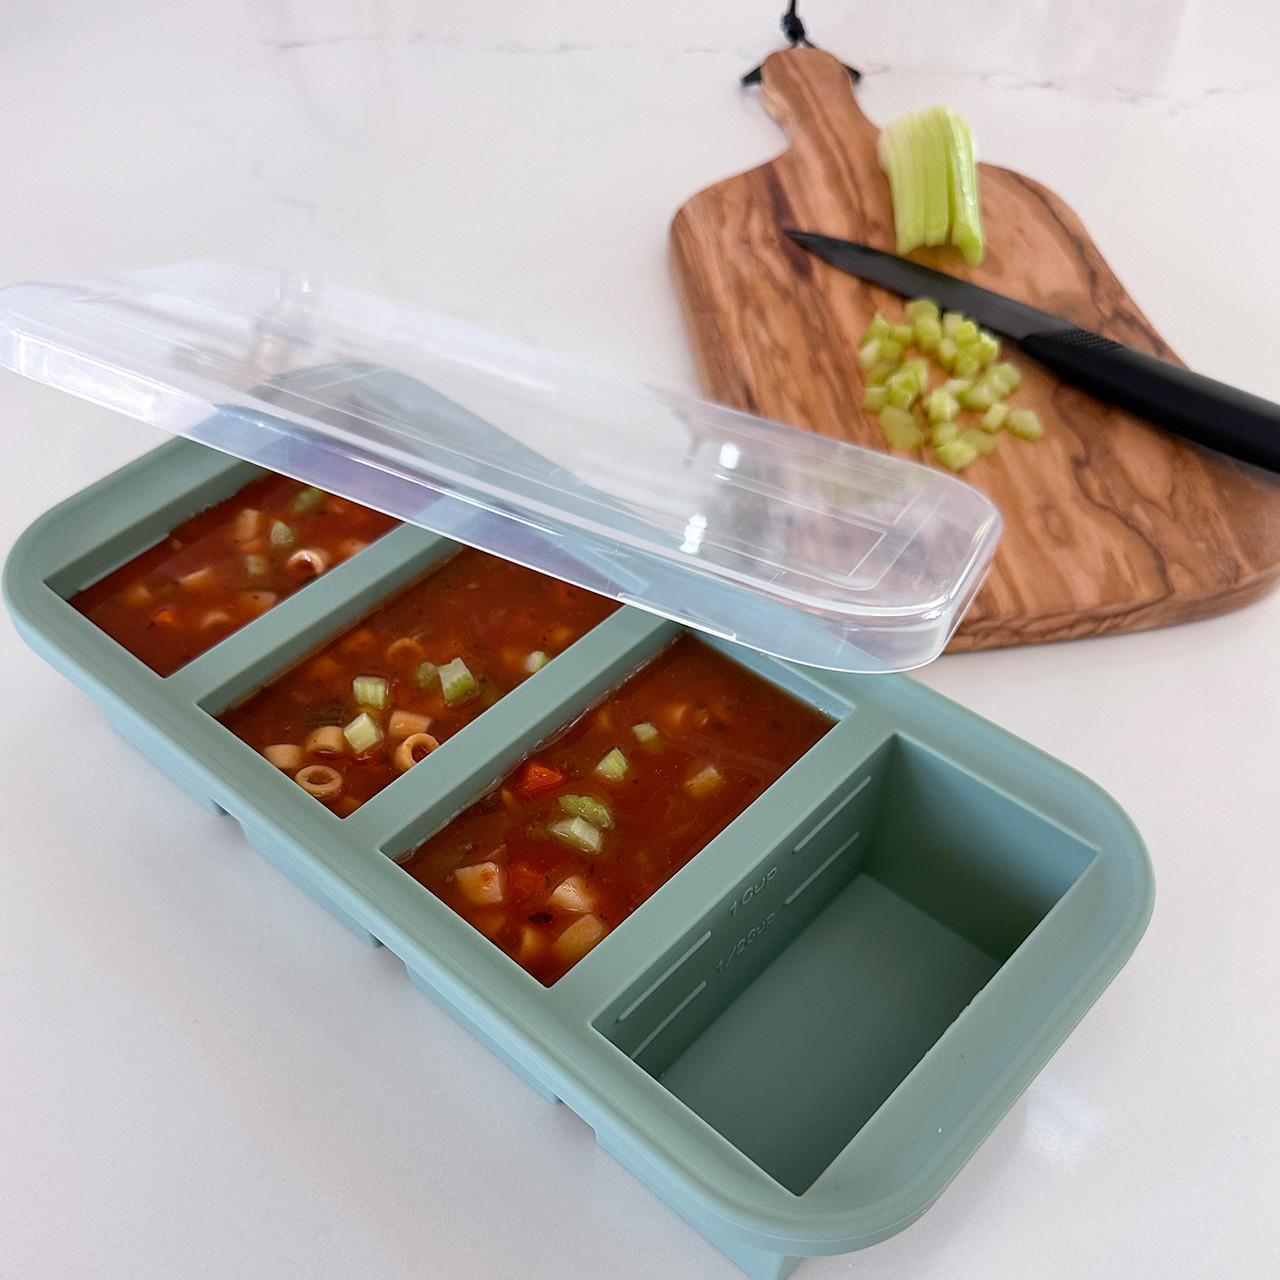 https://cdn11.bigcommerce.com/s-byiy9a91j6/images/stencil/1280x1280/products/10563/29383/Soup_Cubes_Freezer_Tray1__33582.1688743618.jpg?c=1